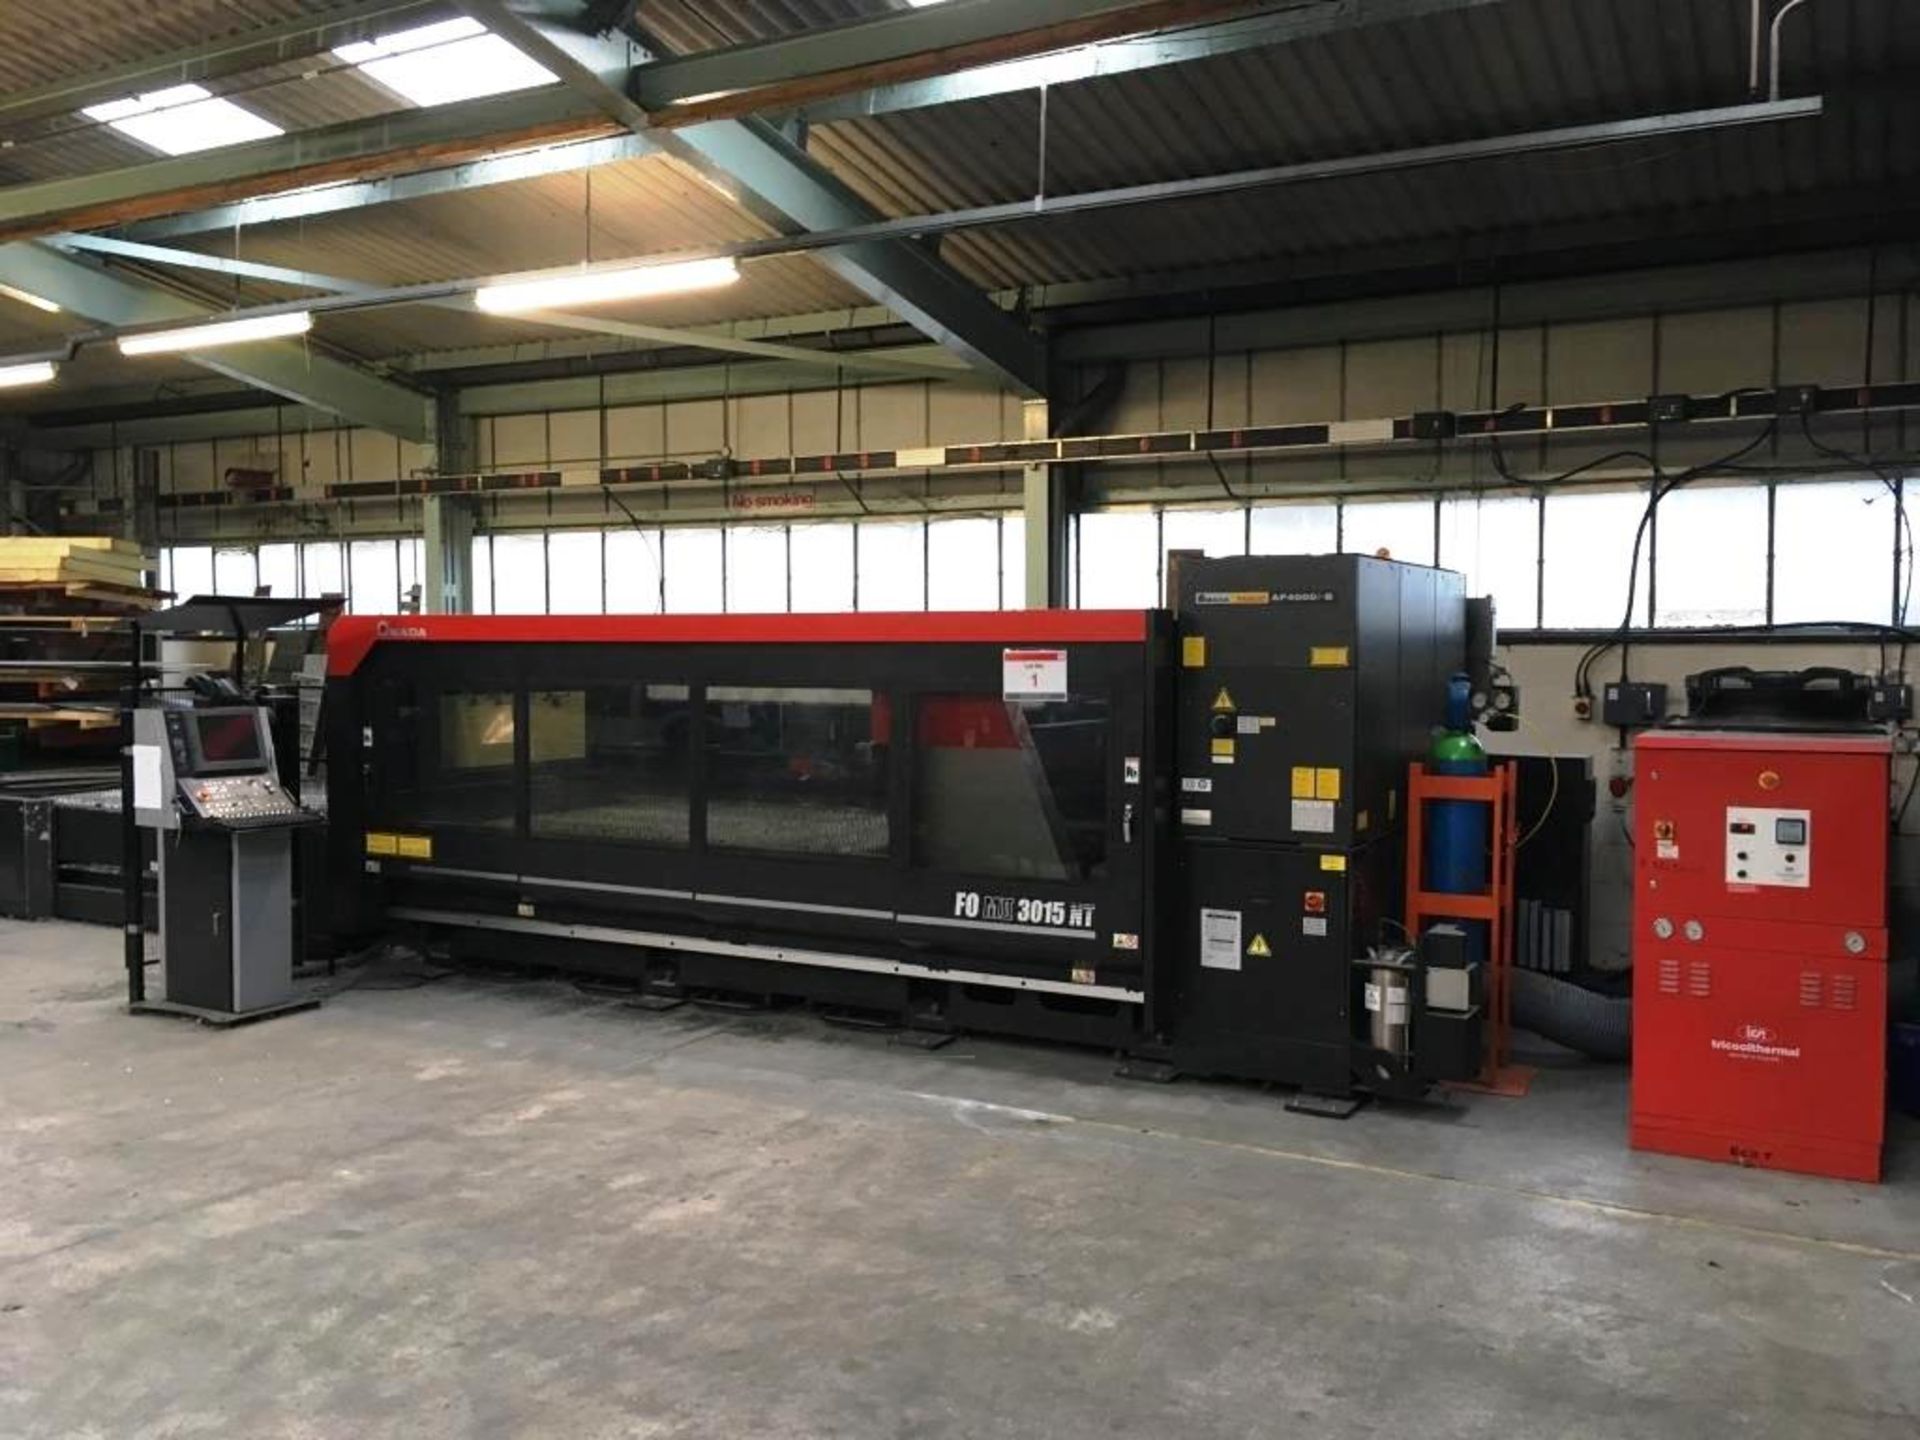 Amada FO MII 3015 NT 4 kw laser cutter, Year of manufacture: 2011, Serial No. 033, approx. 15,000